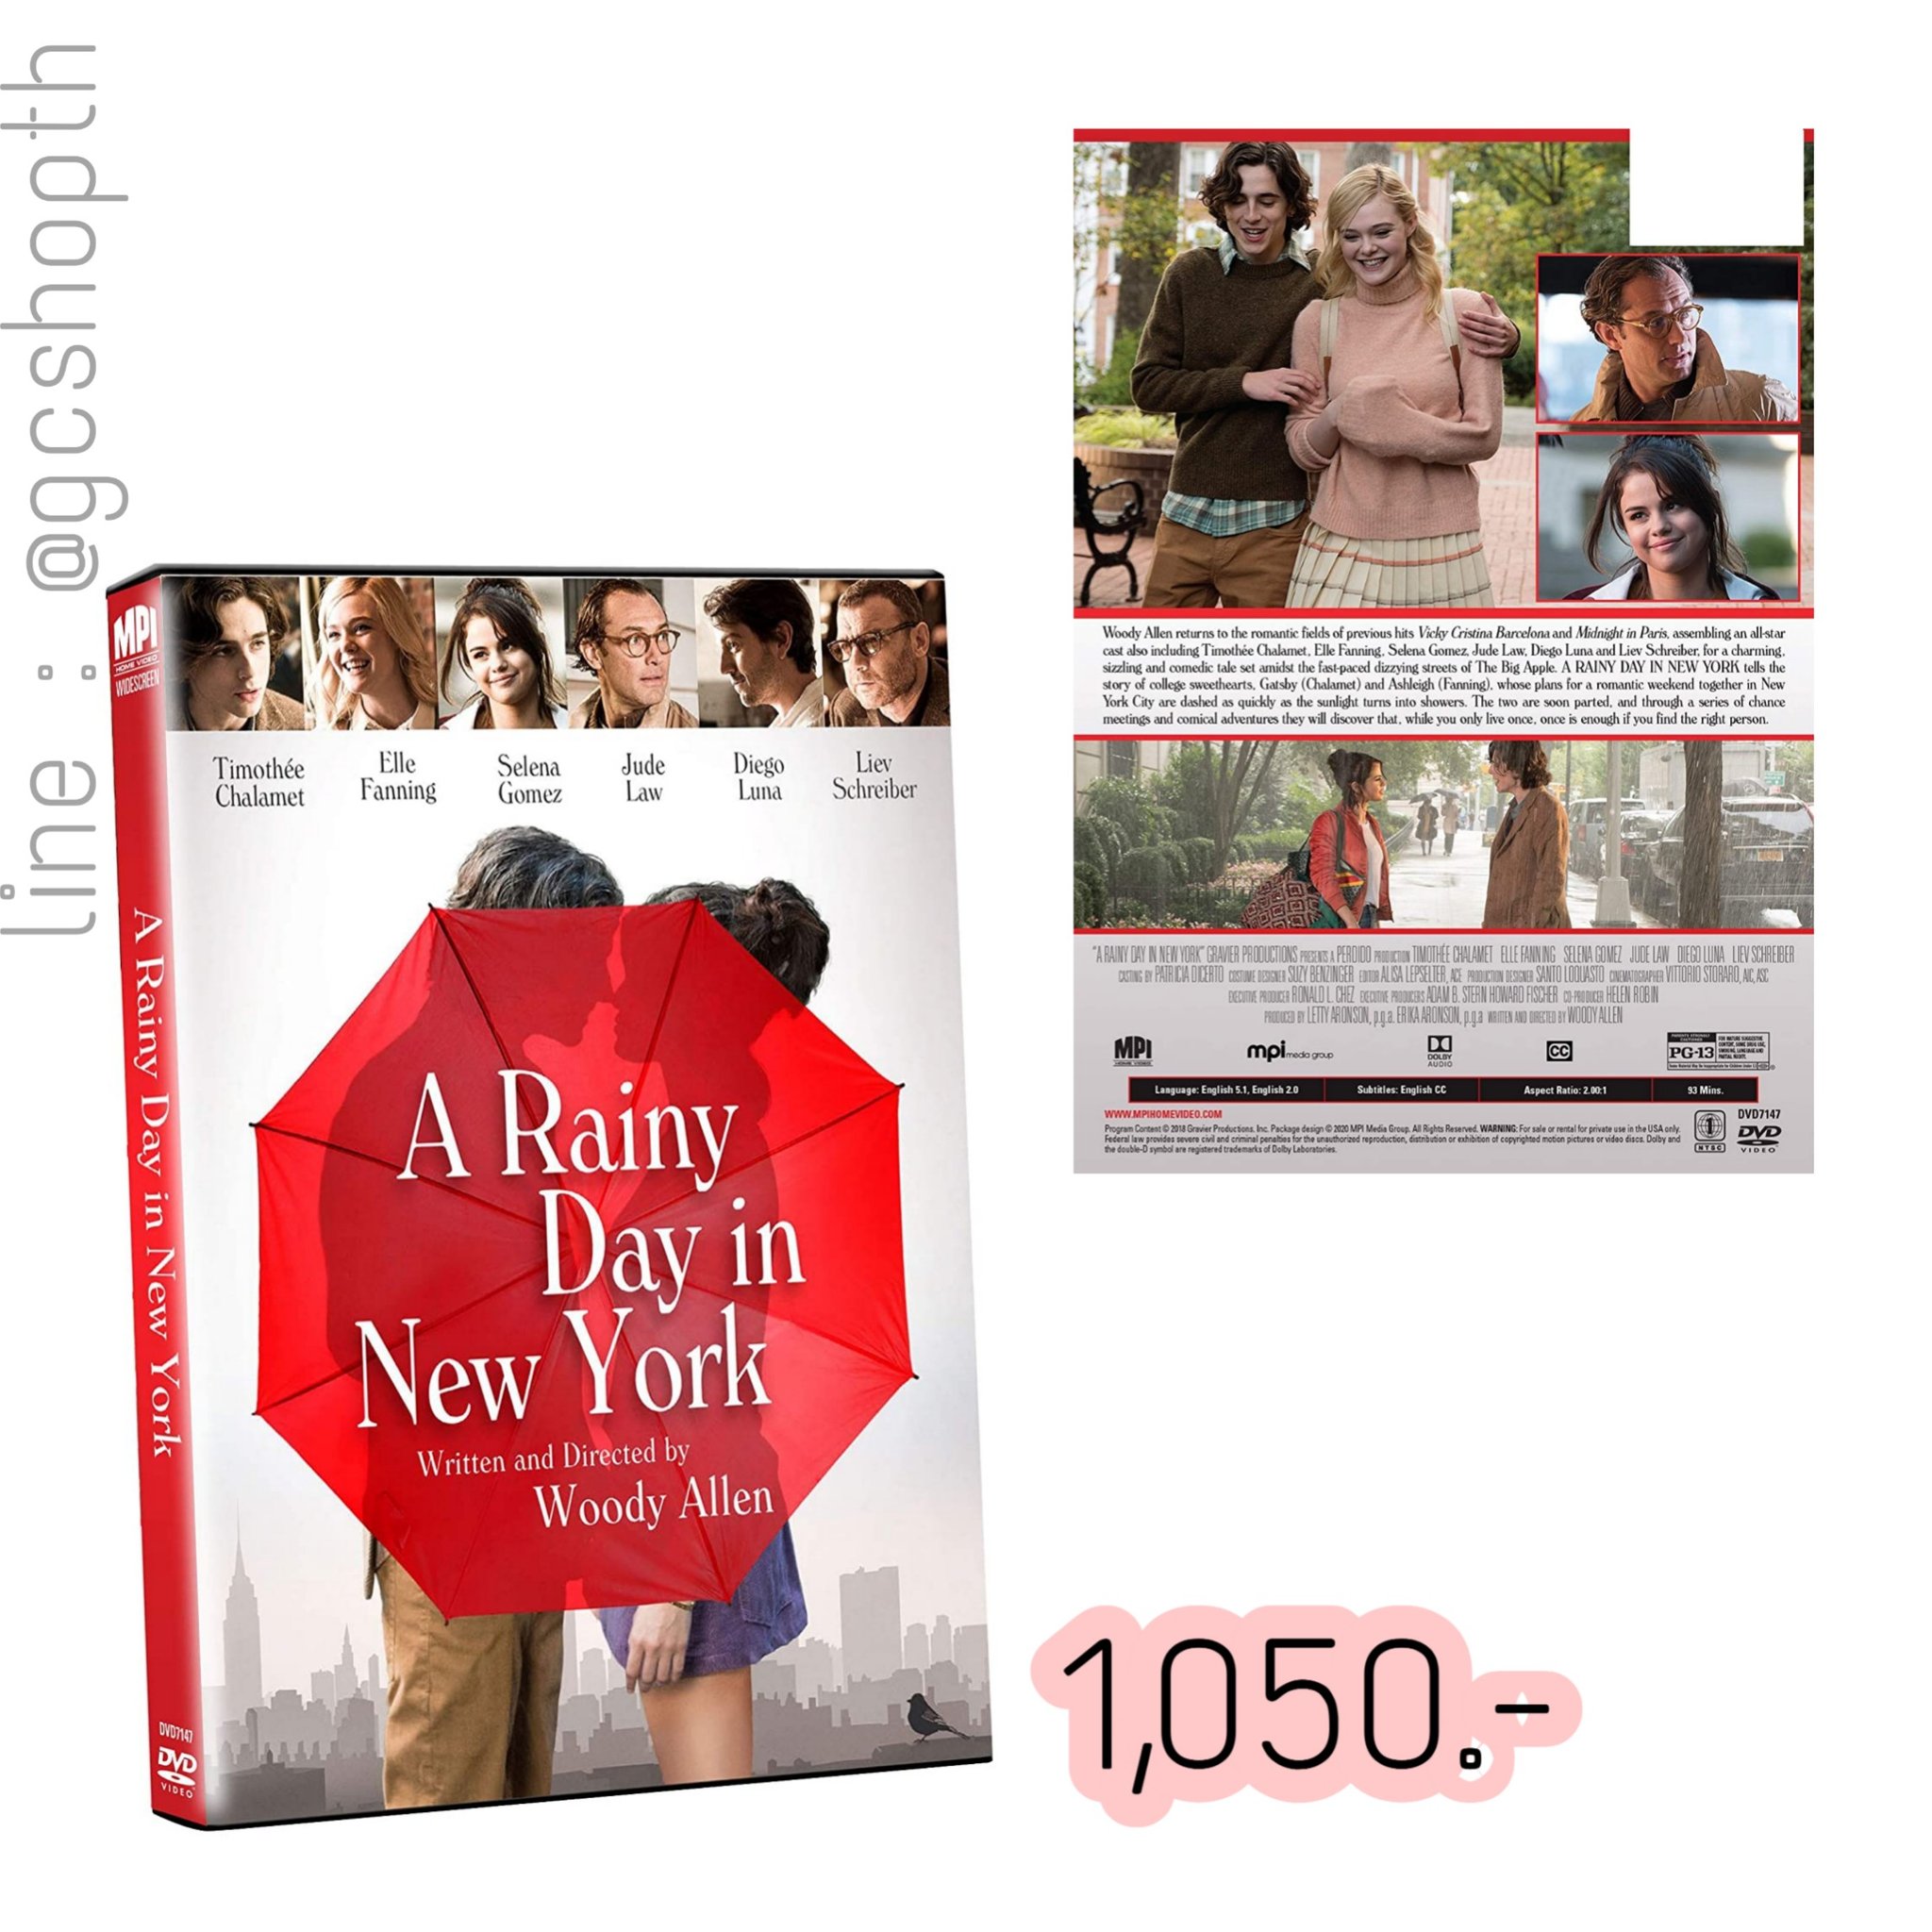 A Rainy Day in New York (2019) dvd movie cover